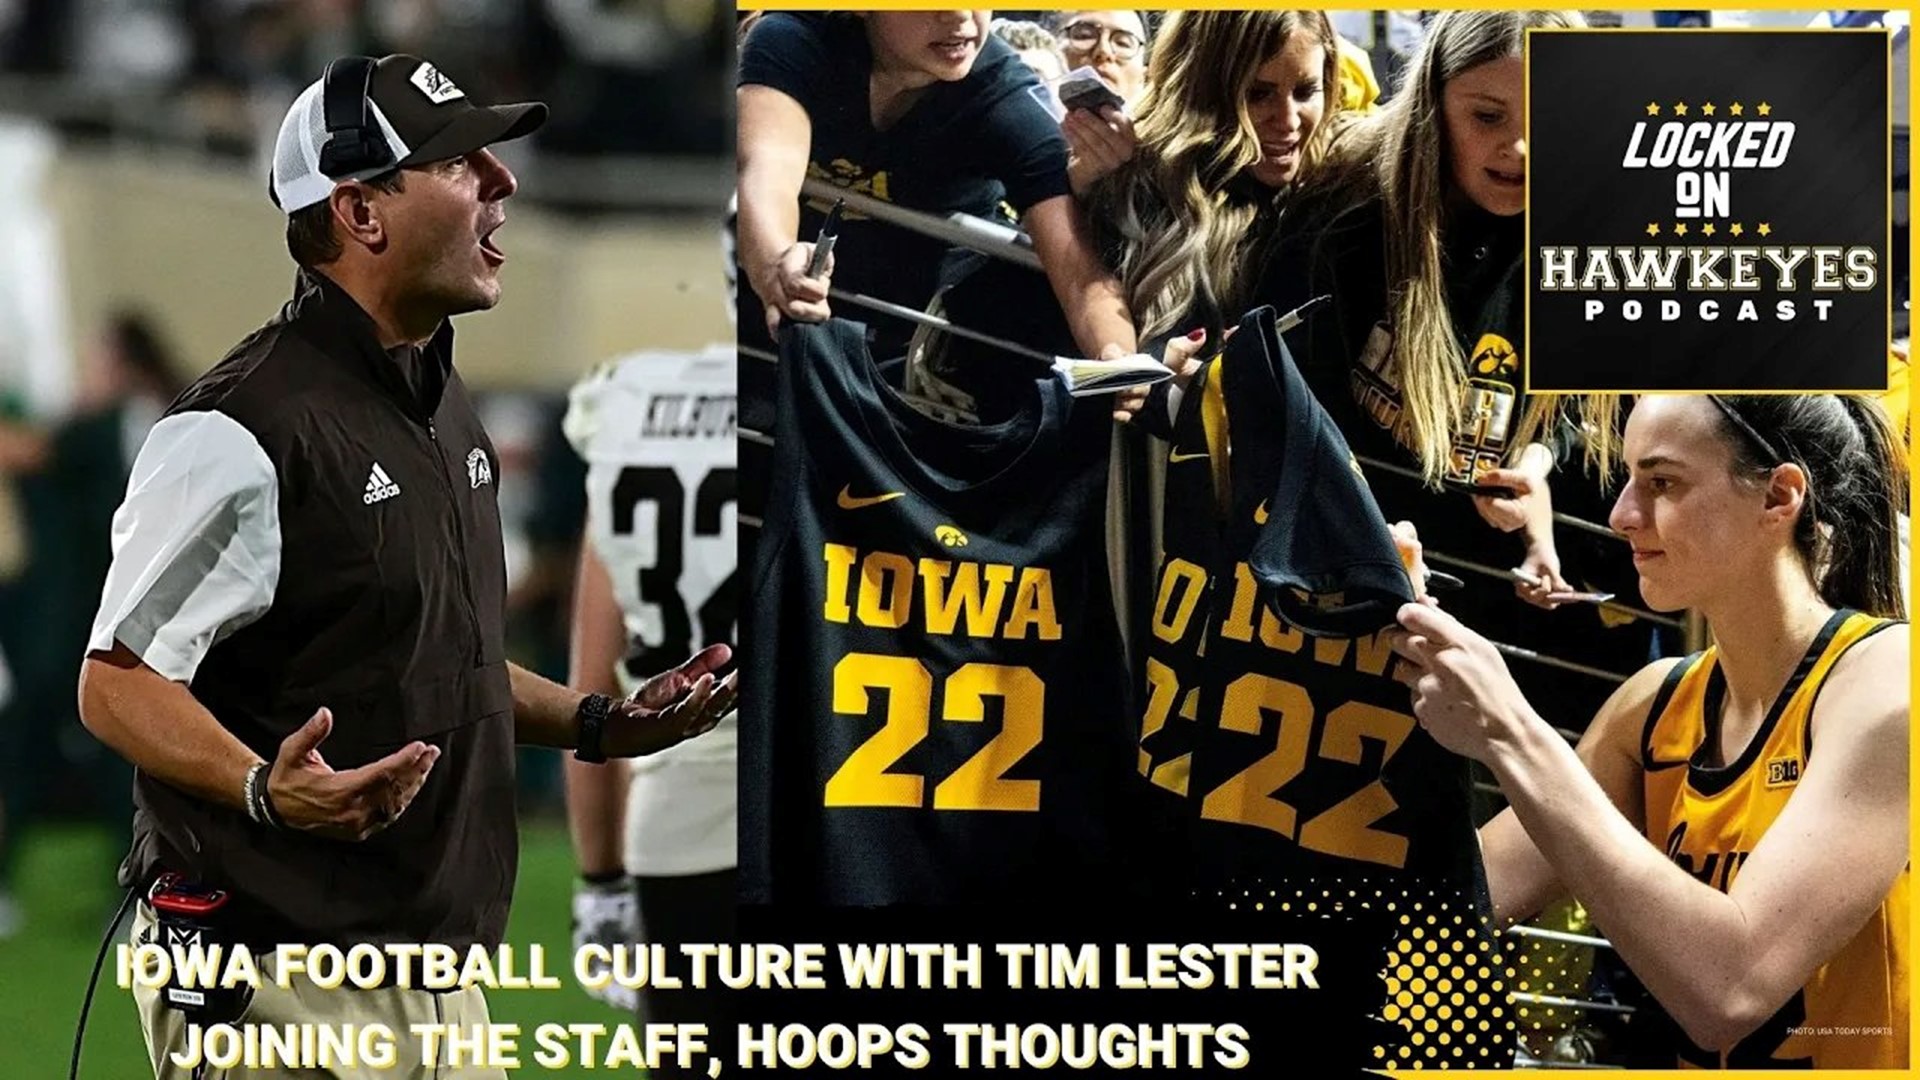 Iowa Football culture & Tim Lester as Offensive Coordinator, Hoops takes with Biz